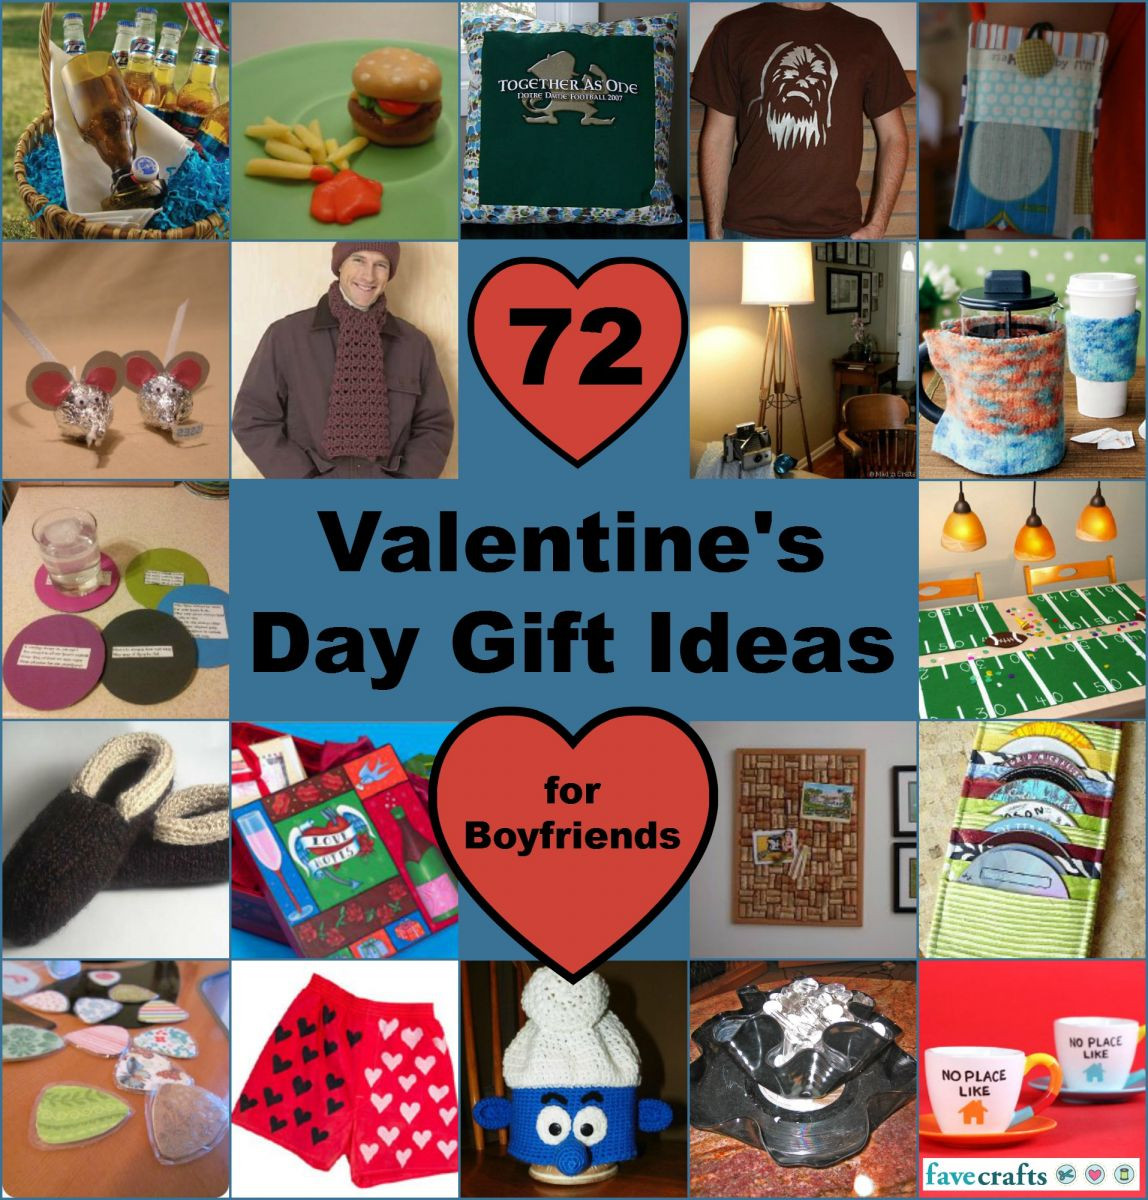 Valentines Day Gift Ideas For Boyfriend
 Top 15 Favorite Valentine s Arts and Crafts Videos and